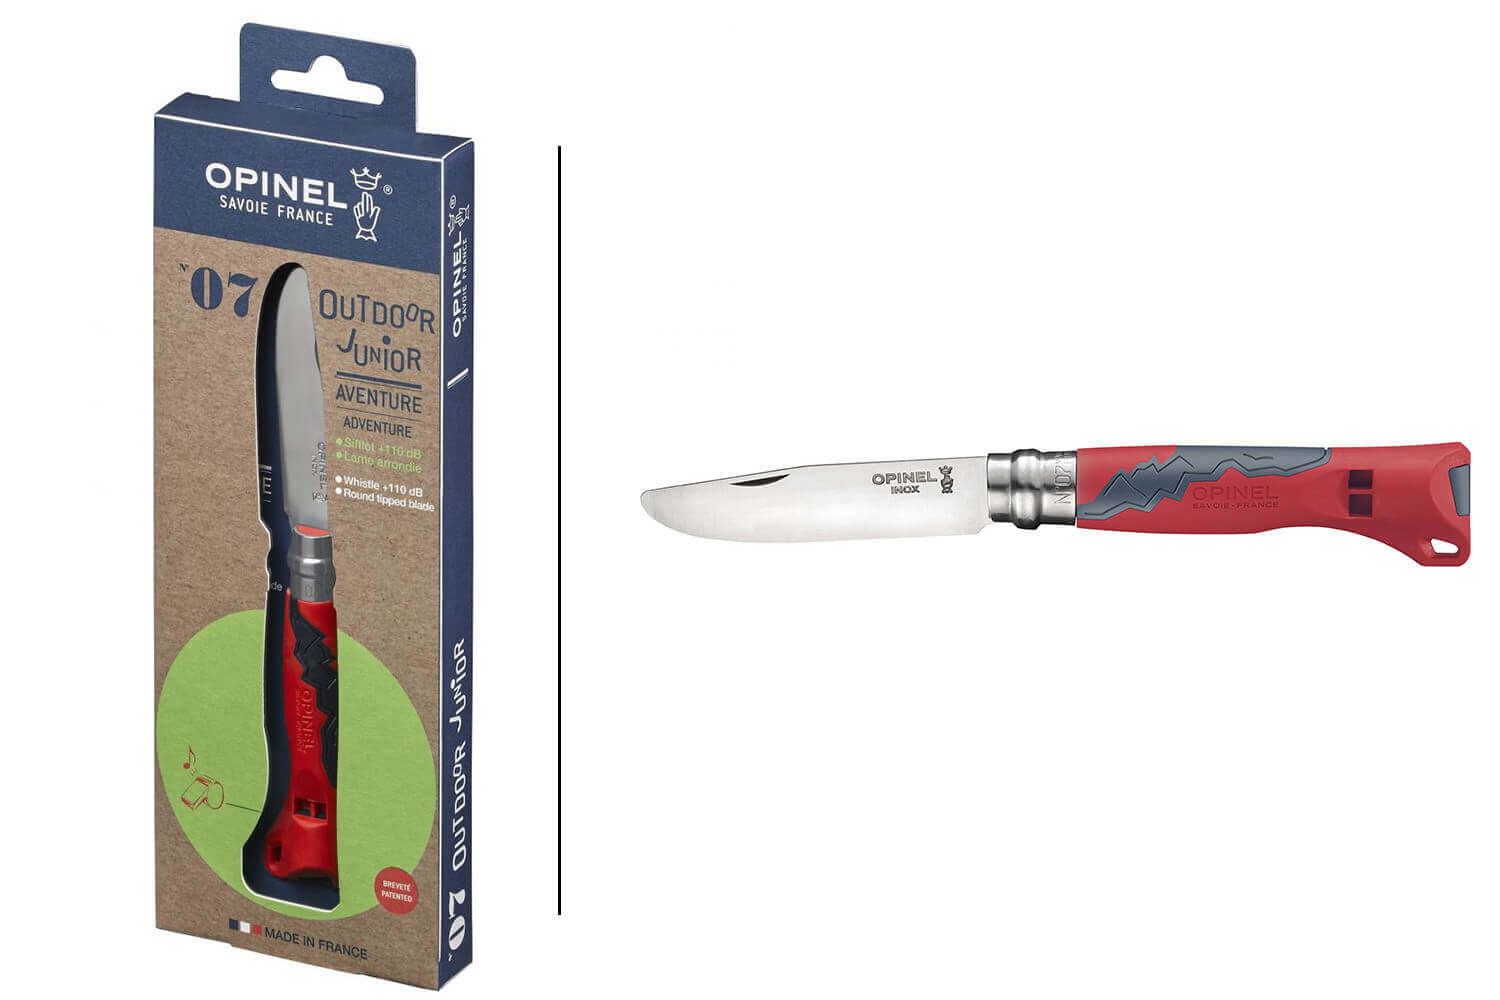 Couteau Opinel Outdoor N°07 Junior - 2 couleurs